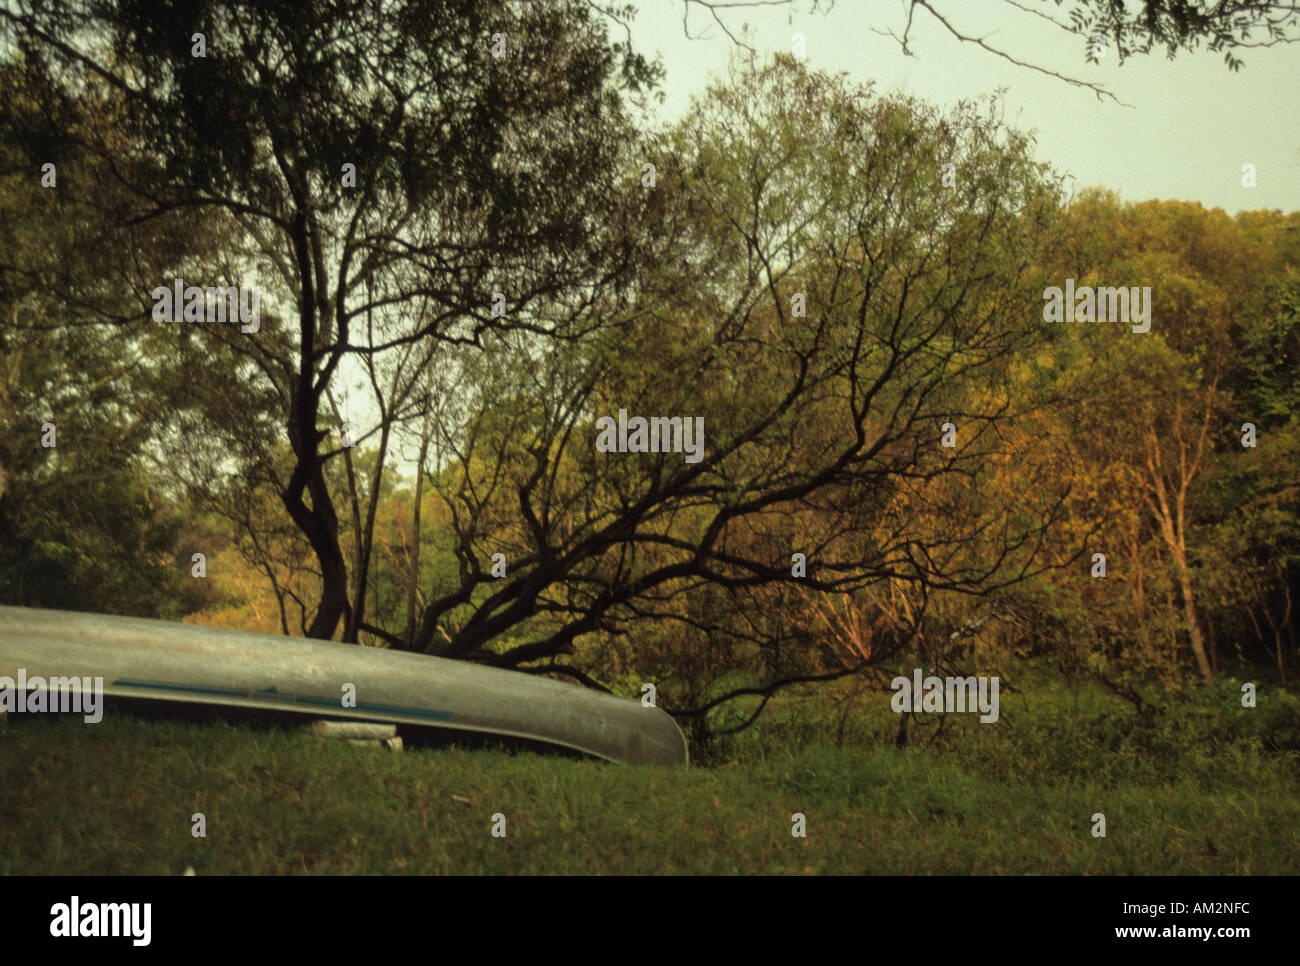 A canoe, overturned and stowed, under a bush in the morning light. Stock Photo